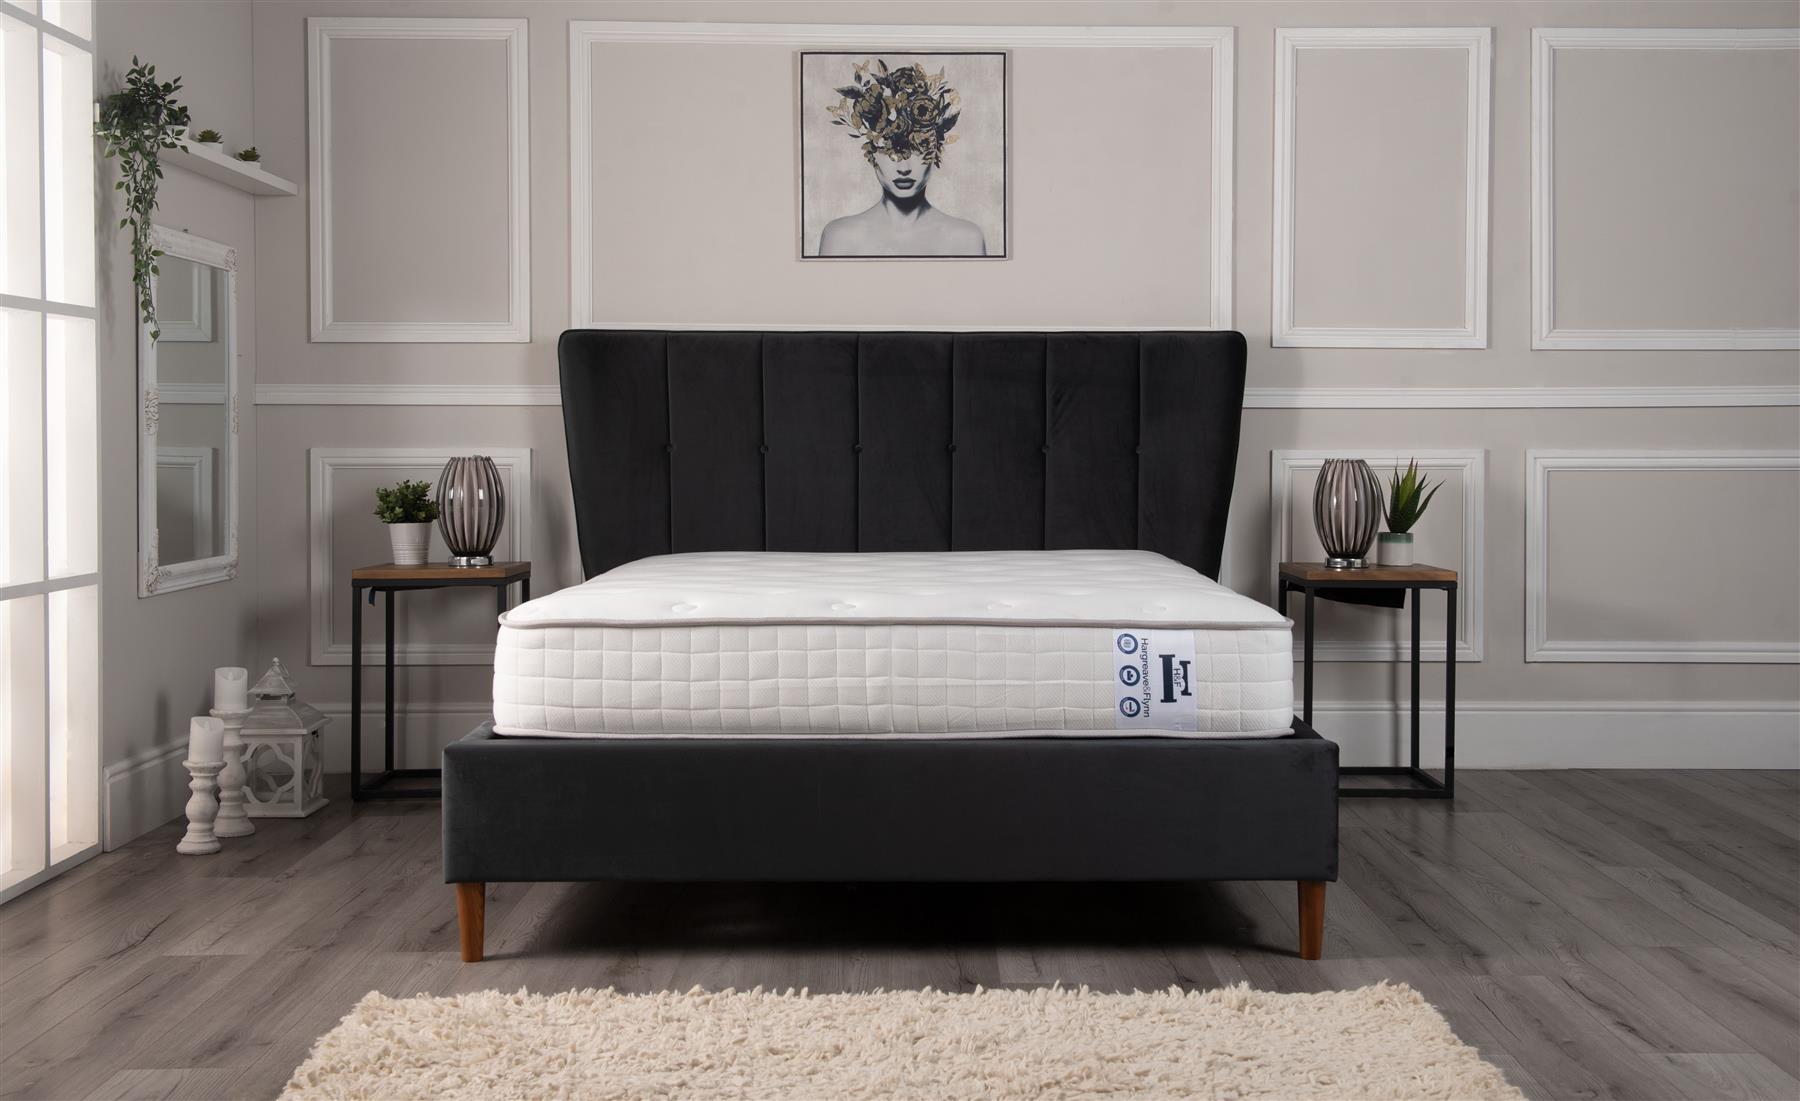 Hargreave & Flynn – 8 Inch Deep Pocket Sprung Mattress with Wool and Cotton Fillings. Soft Knitted Sleeping Surface, King